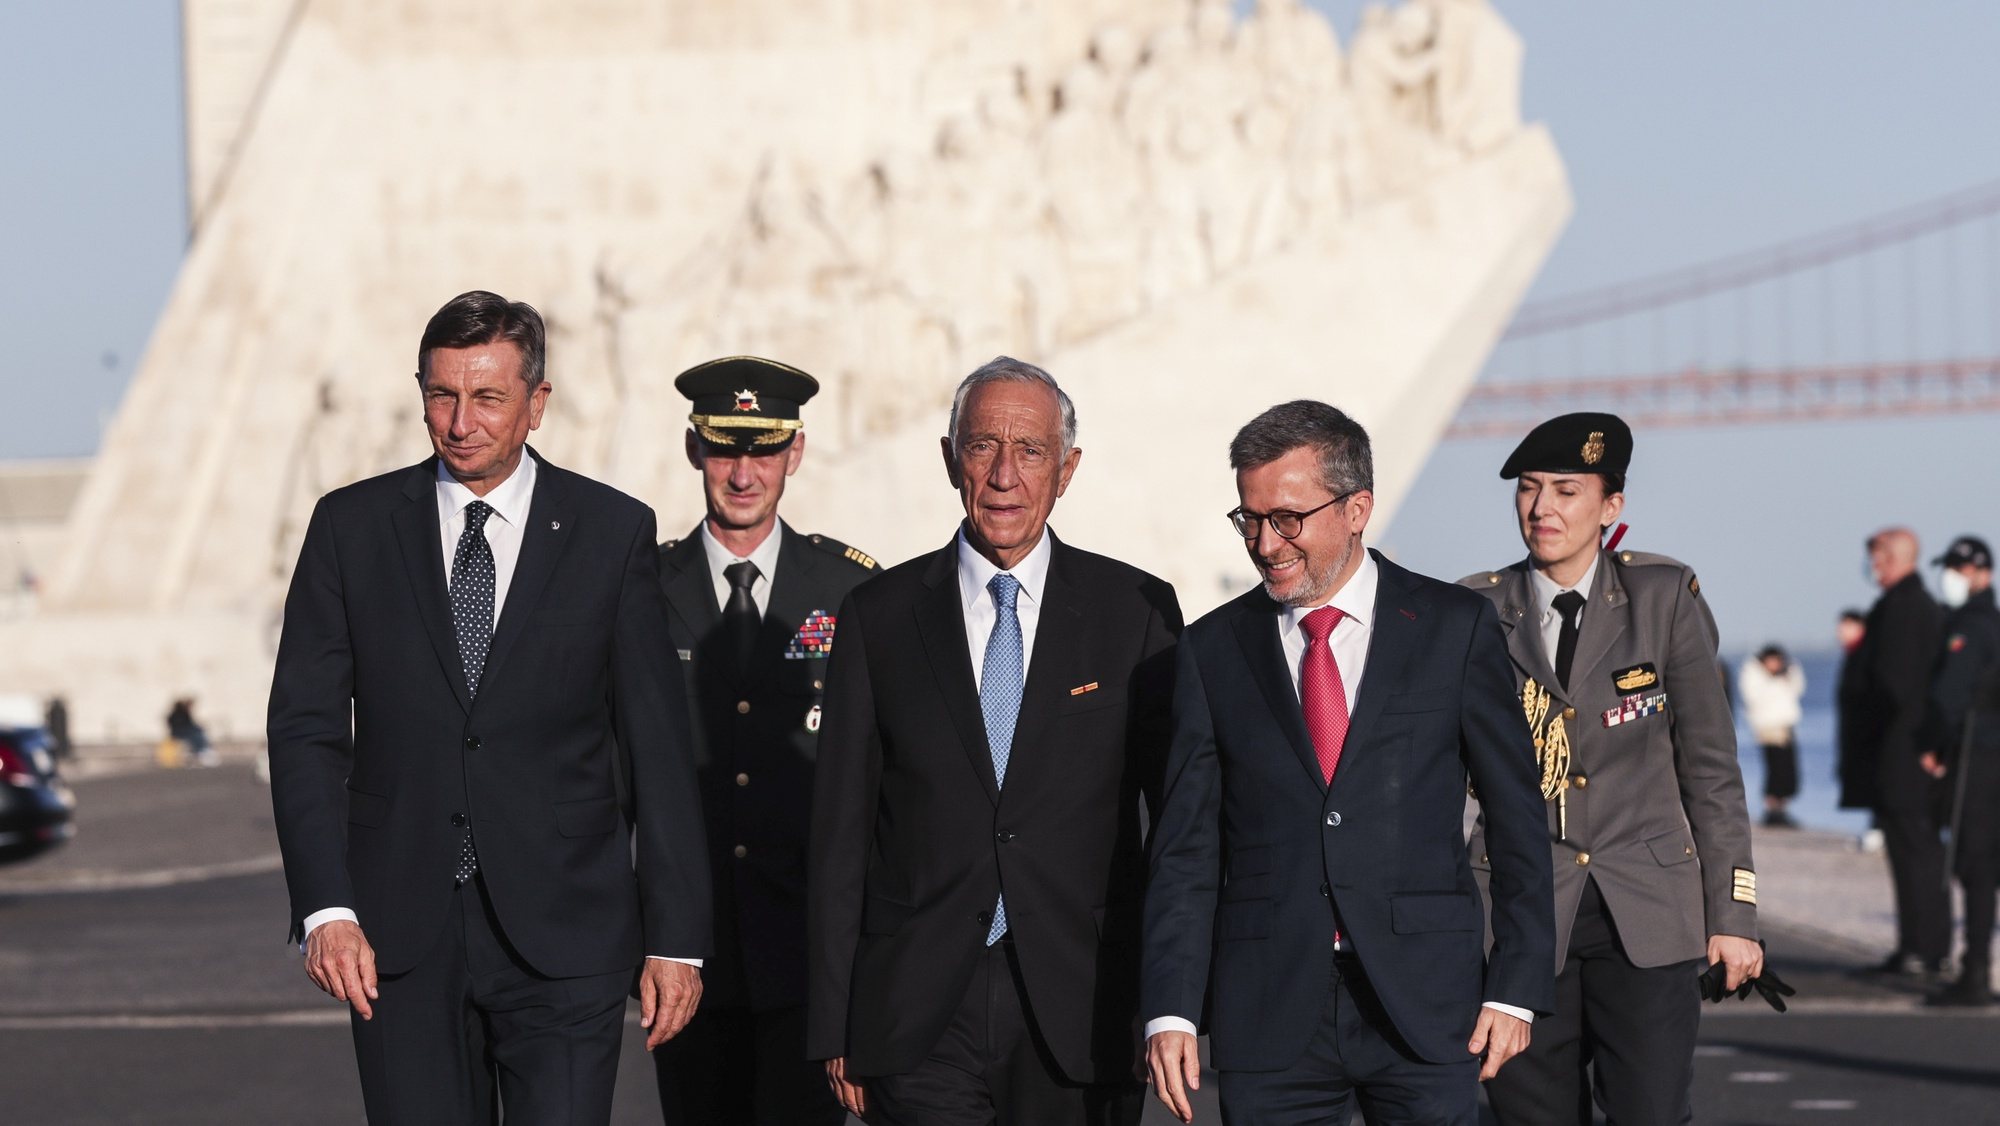 Portugal&#039;s President Marcelo Rebelo de Sousa (C) with Slovenia&#039;s President Borut Pahor (L) and Lisbon&#039;s mayor, Carlos Moedas (2R) at their arrival to inaugurate the bench alluding to friendship between Portugal and Slovenia at Belem, in Lisbon, Portugal, 14 February 2022. Borut Pahor is on a two-day official visit to Portugal. TIAGO PETINGA/LUSA